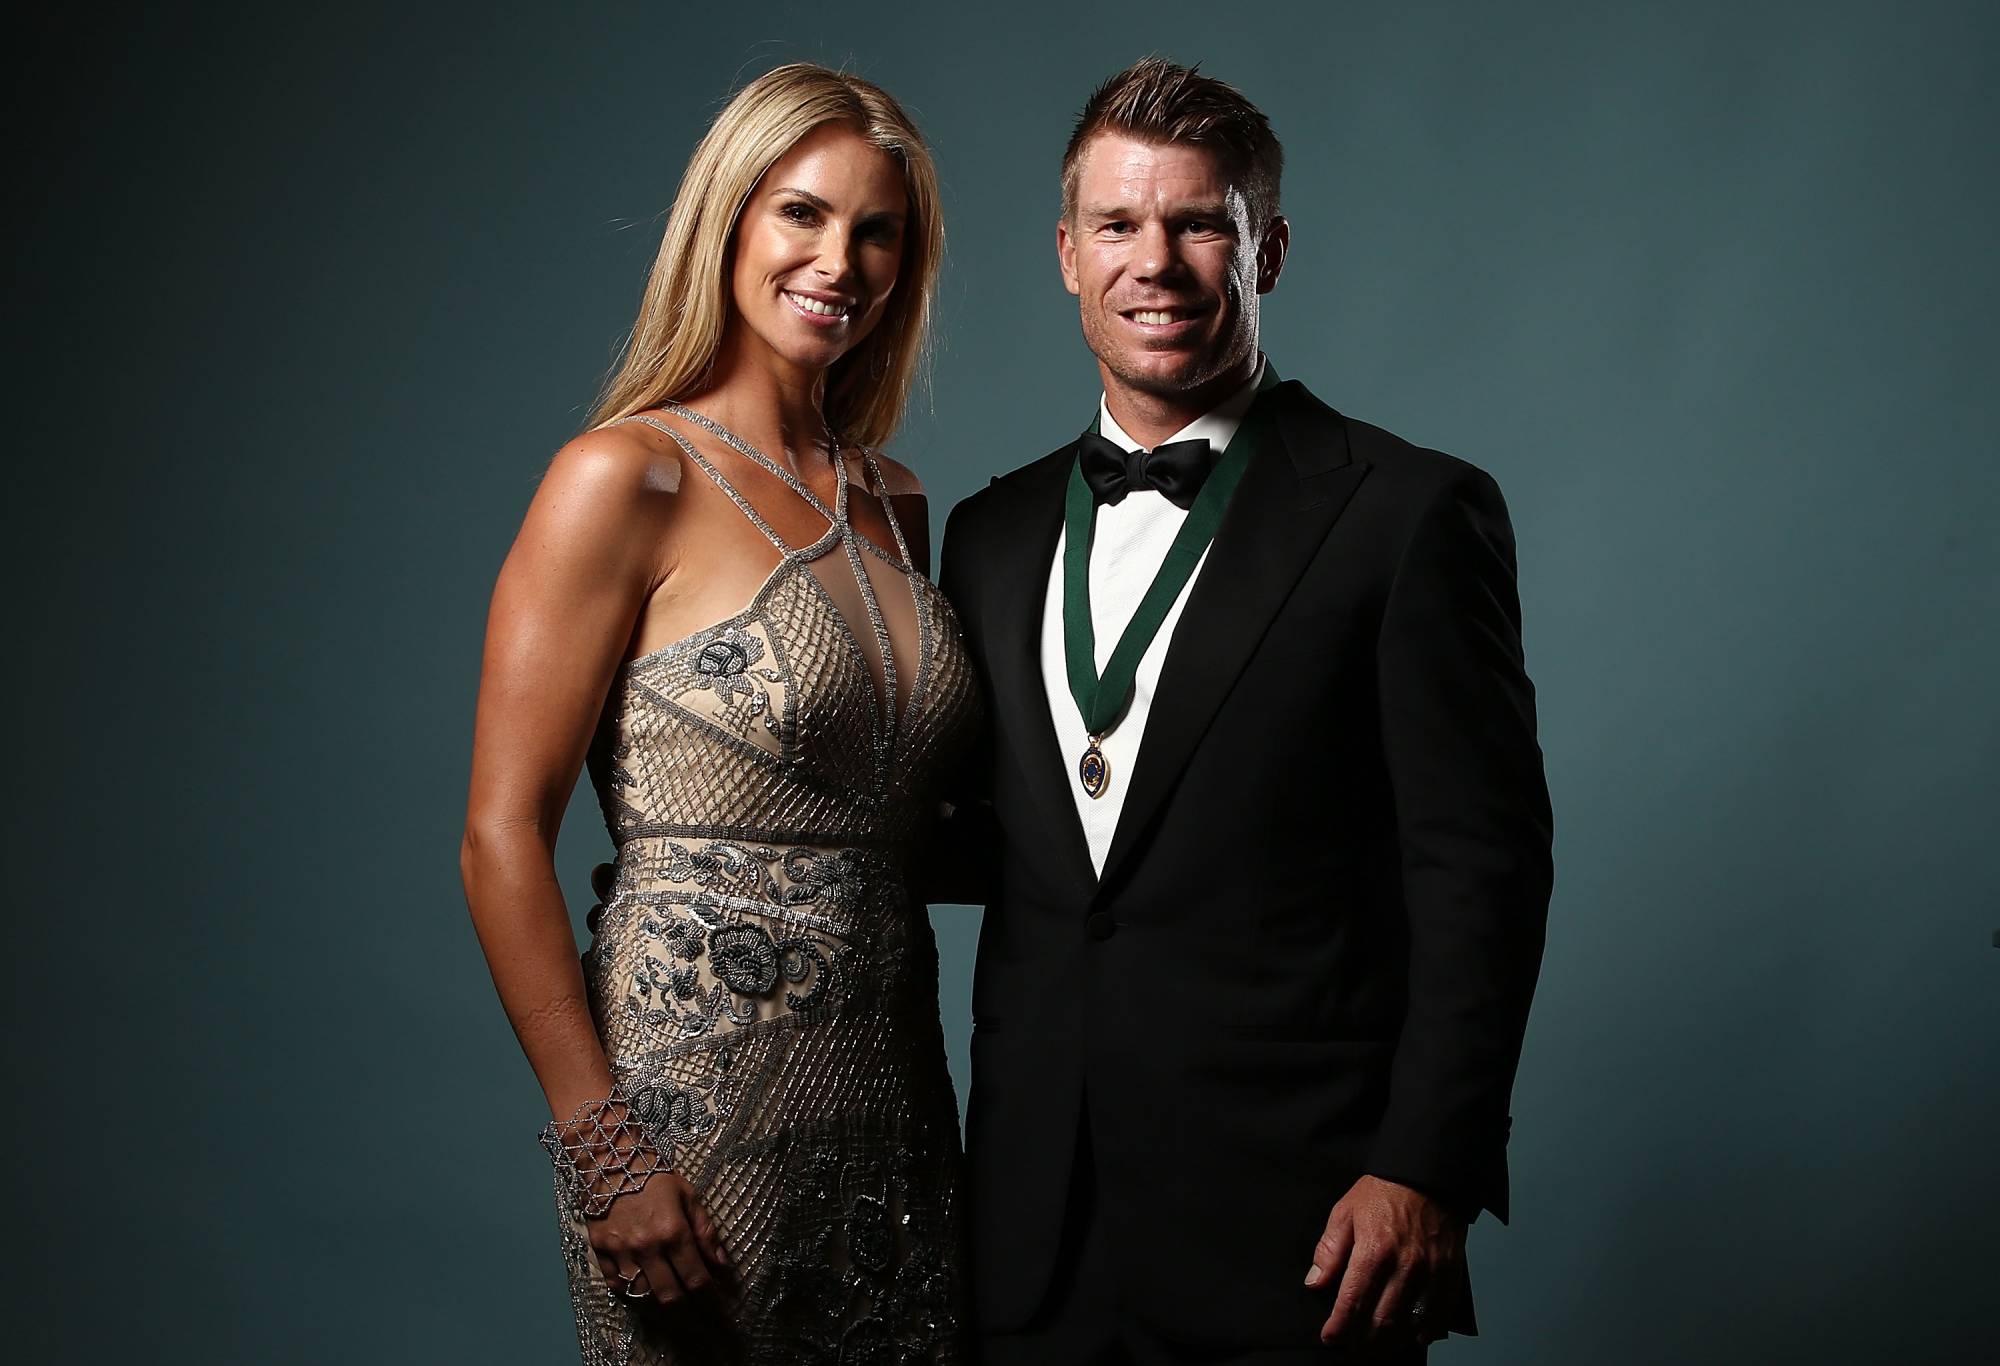 Candice Warner and David Warner pose after winning the Allan Border Medal during the 2017 Allan Border Medal at The Star on January 23, 2017 in Sydney, Australia. (Photo by Mark Metcalfe/Getty Images)